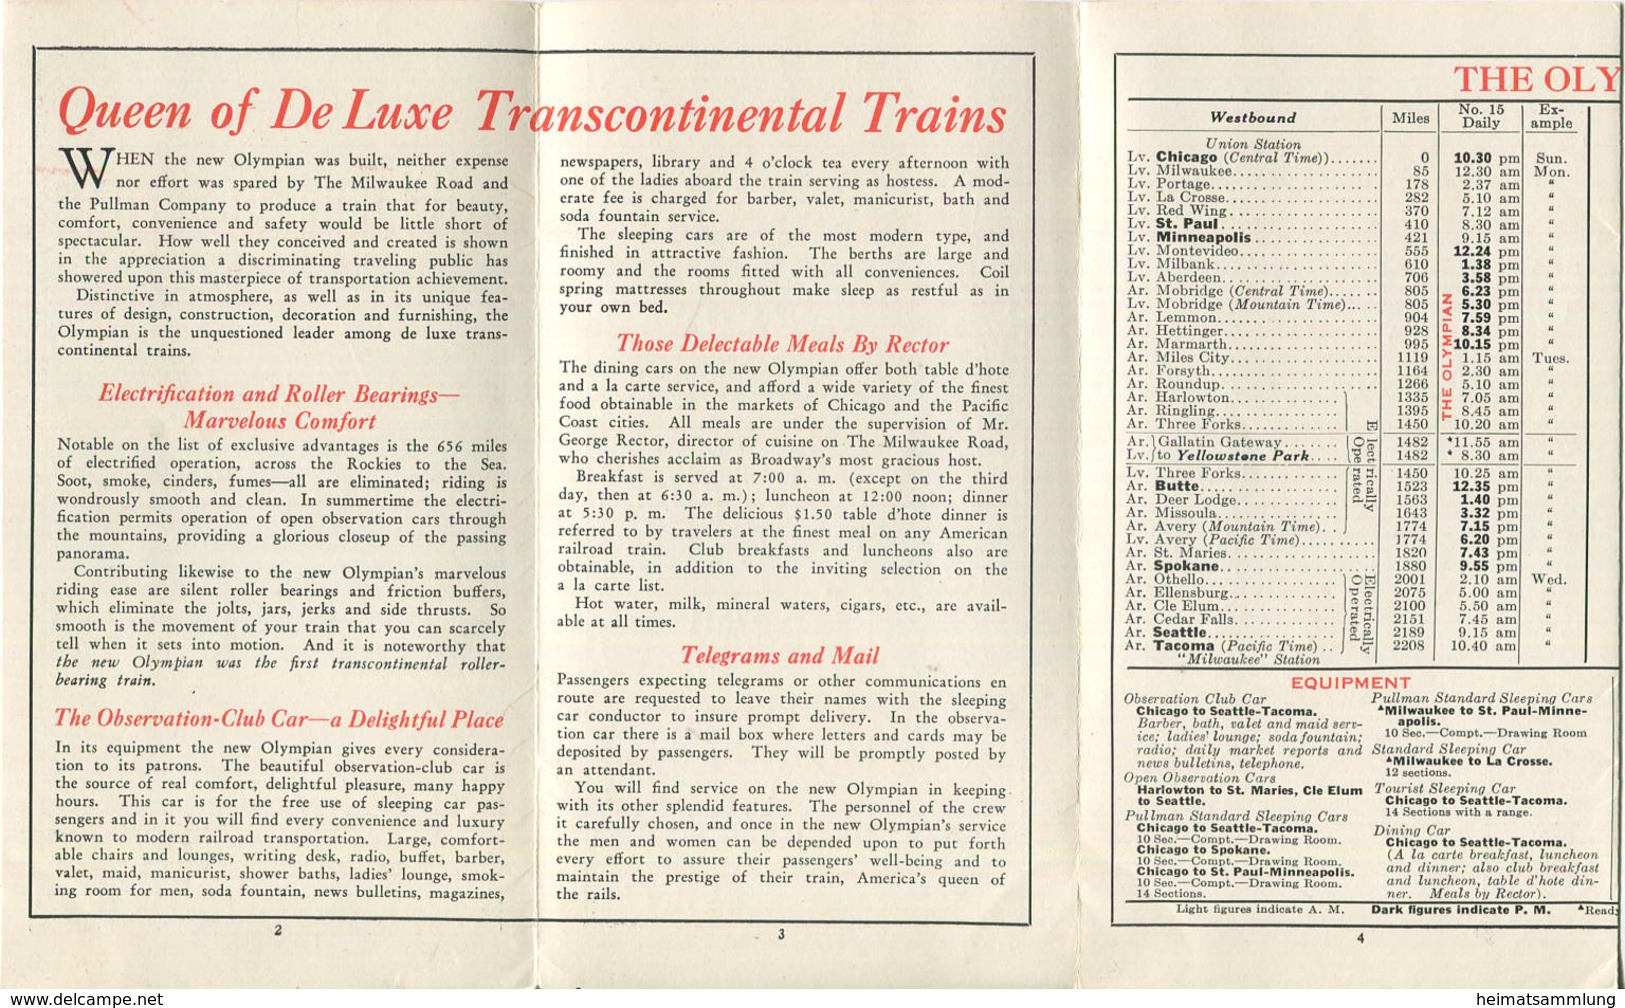 The Olympian 1930 - Queen Of De Luxe Transcontinental Trains - Fahrplan Between Cjicago And Seattle-Tacoma - Monde